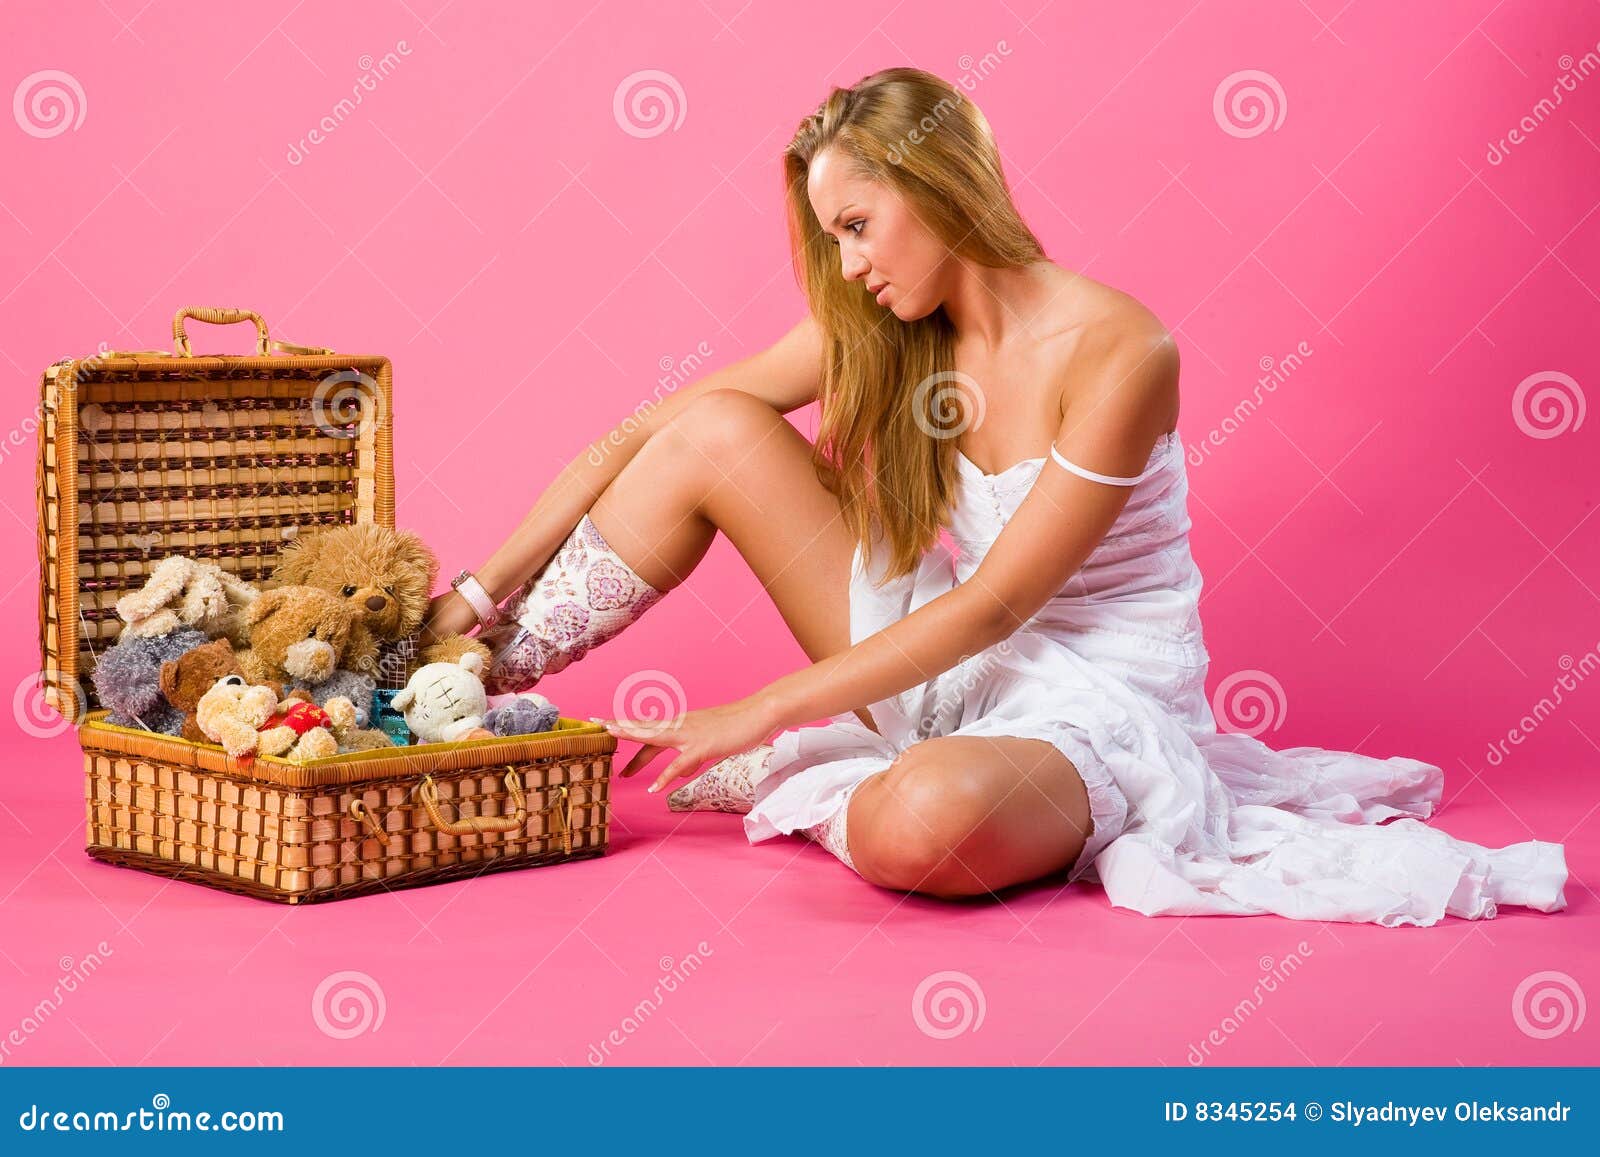 sweetness blond with box of toys